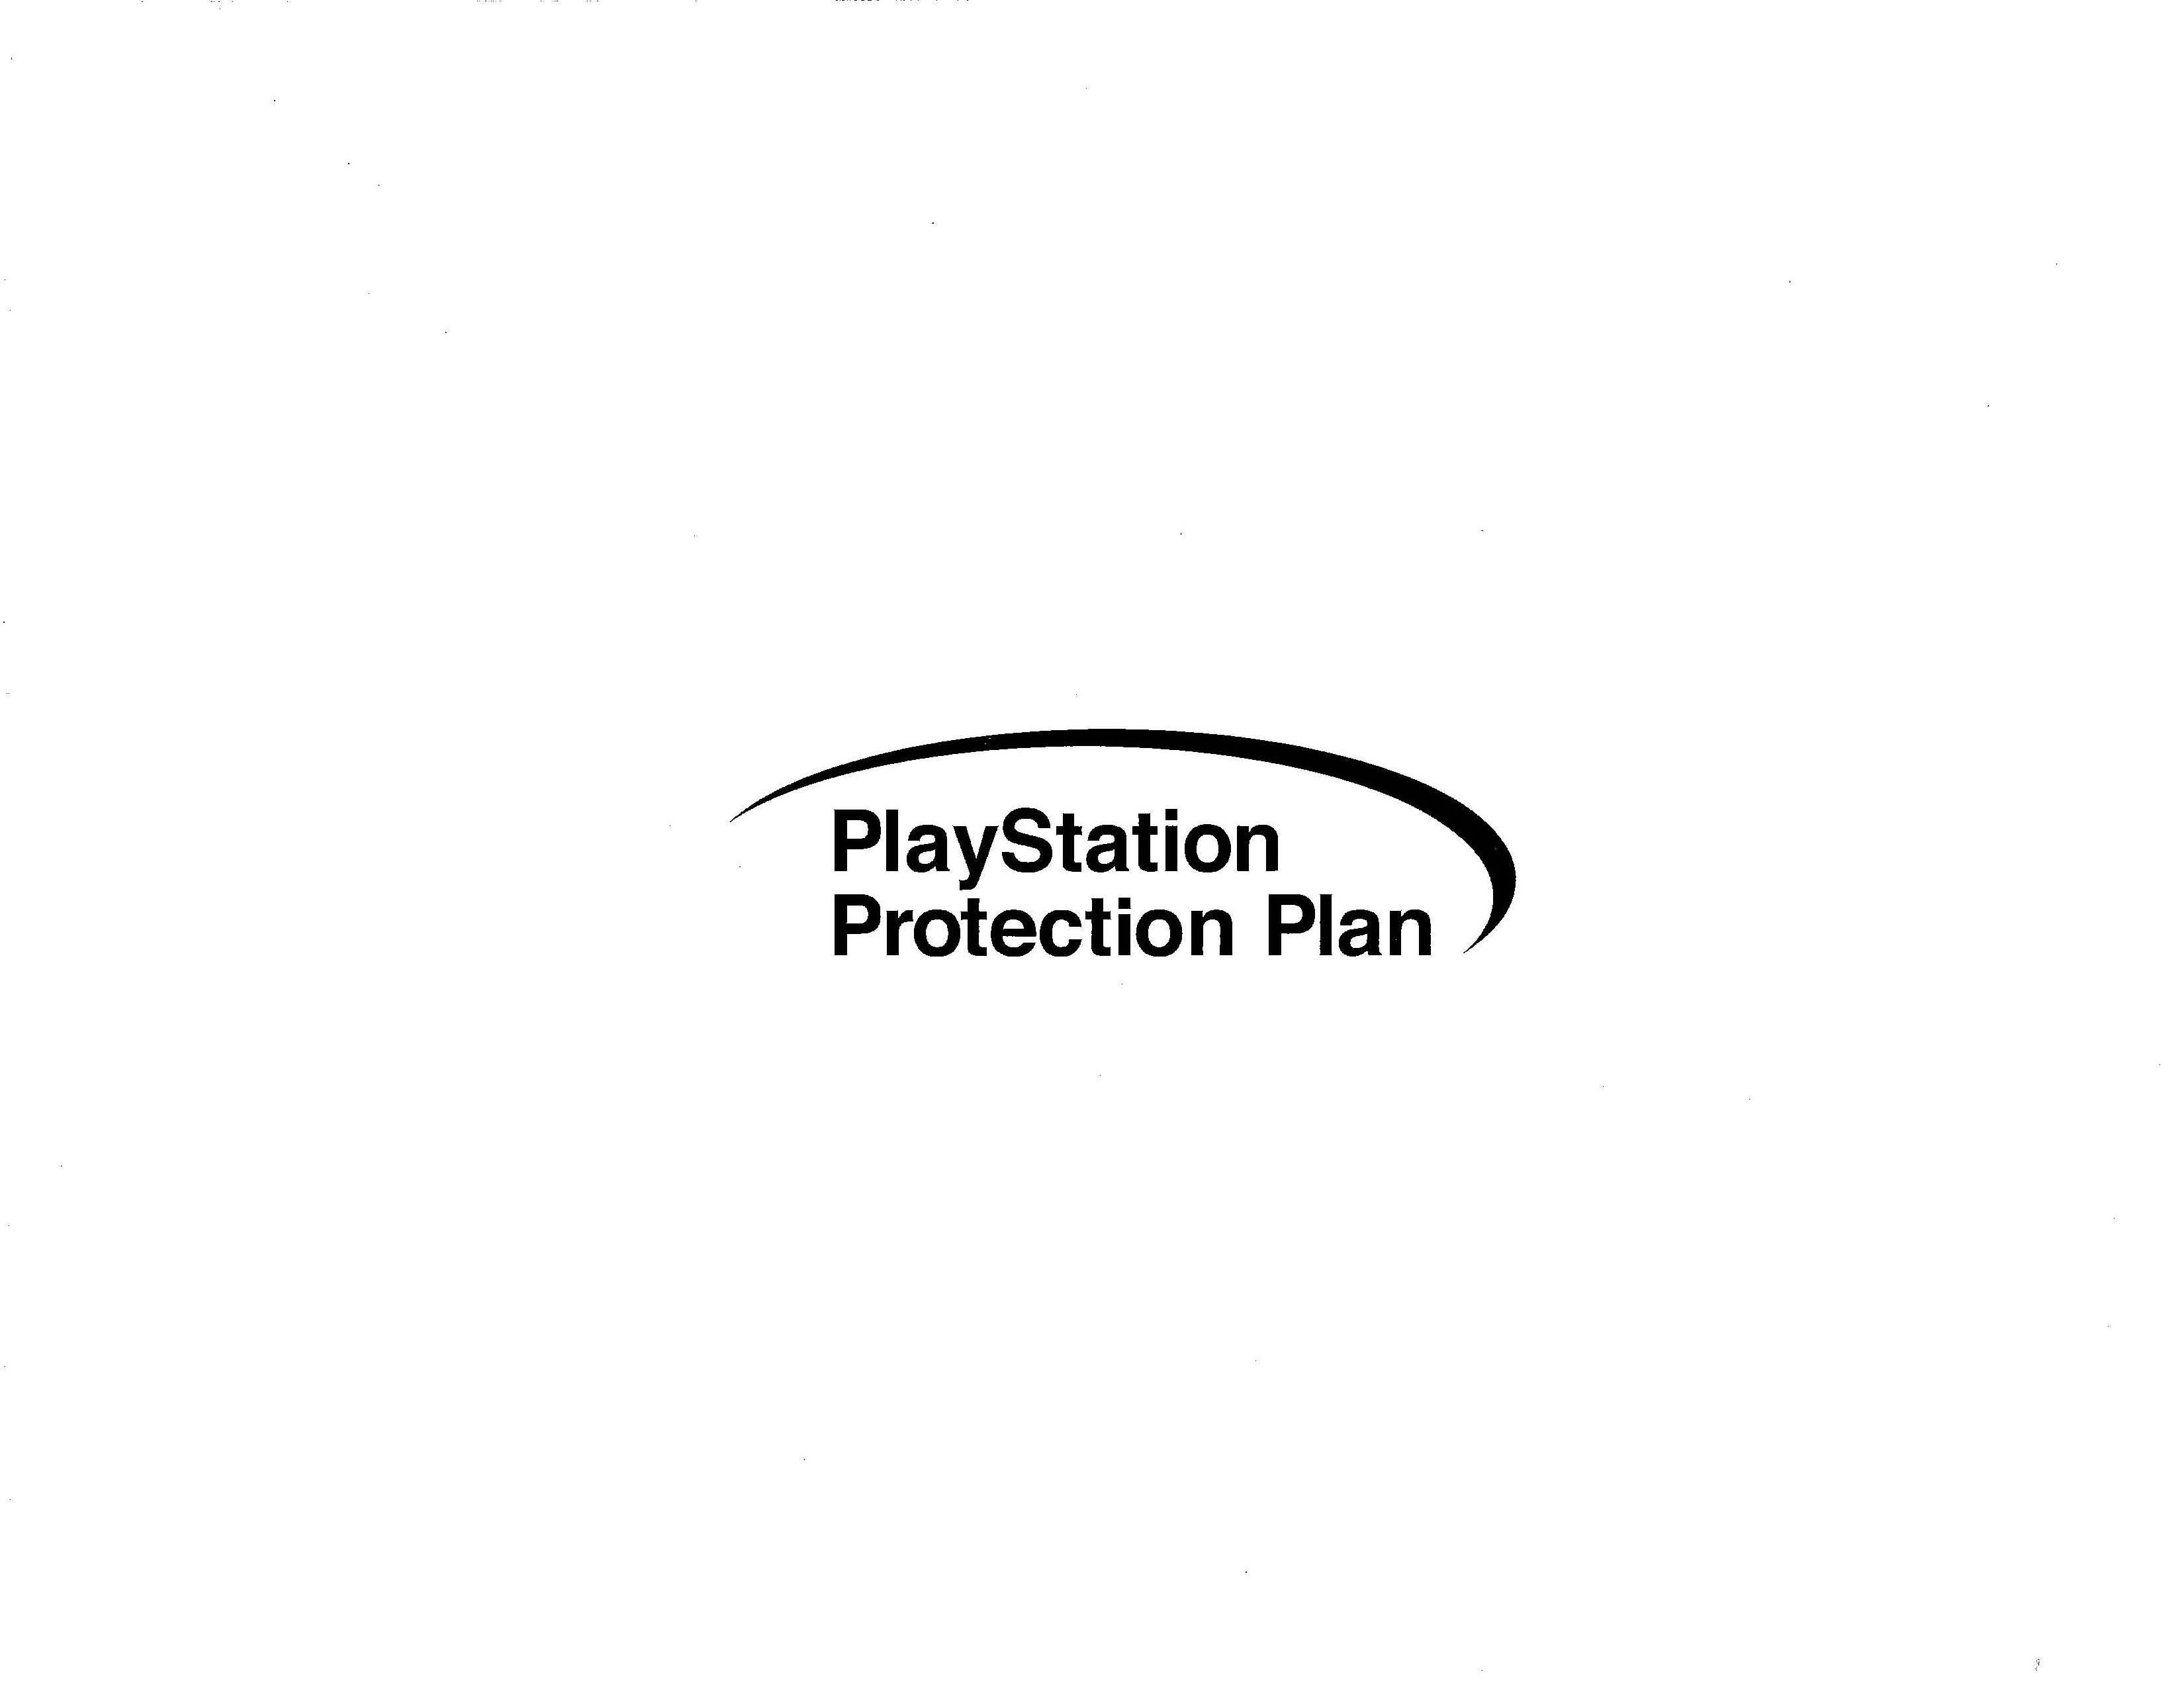  PLAYSTATION PROTECTION PLAN